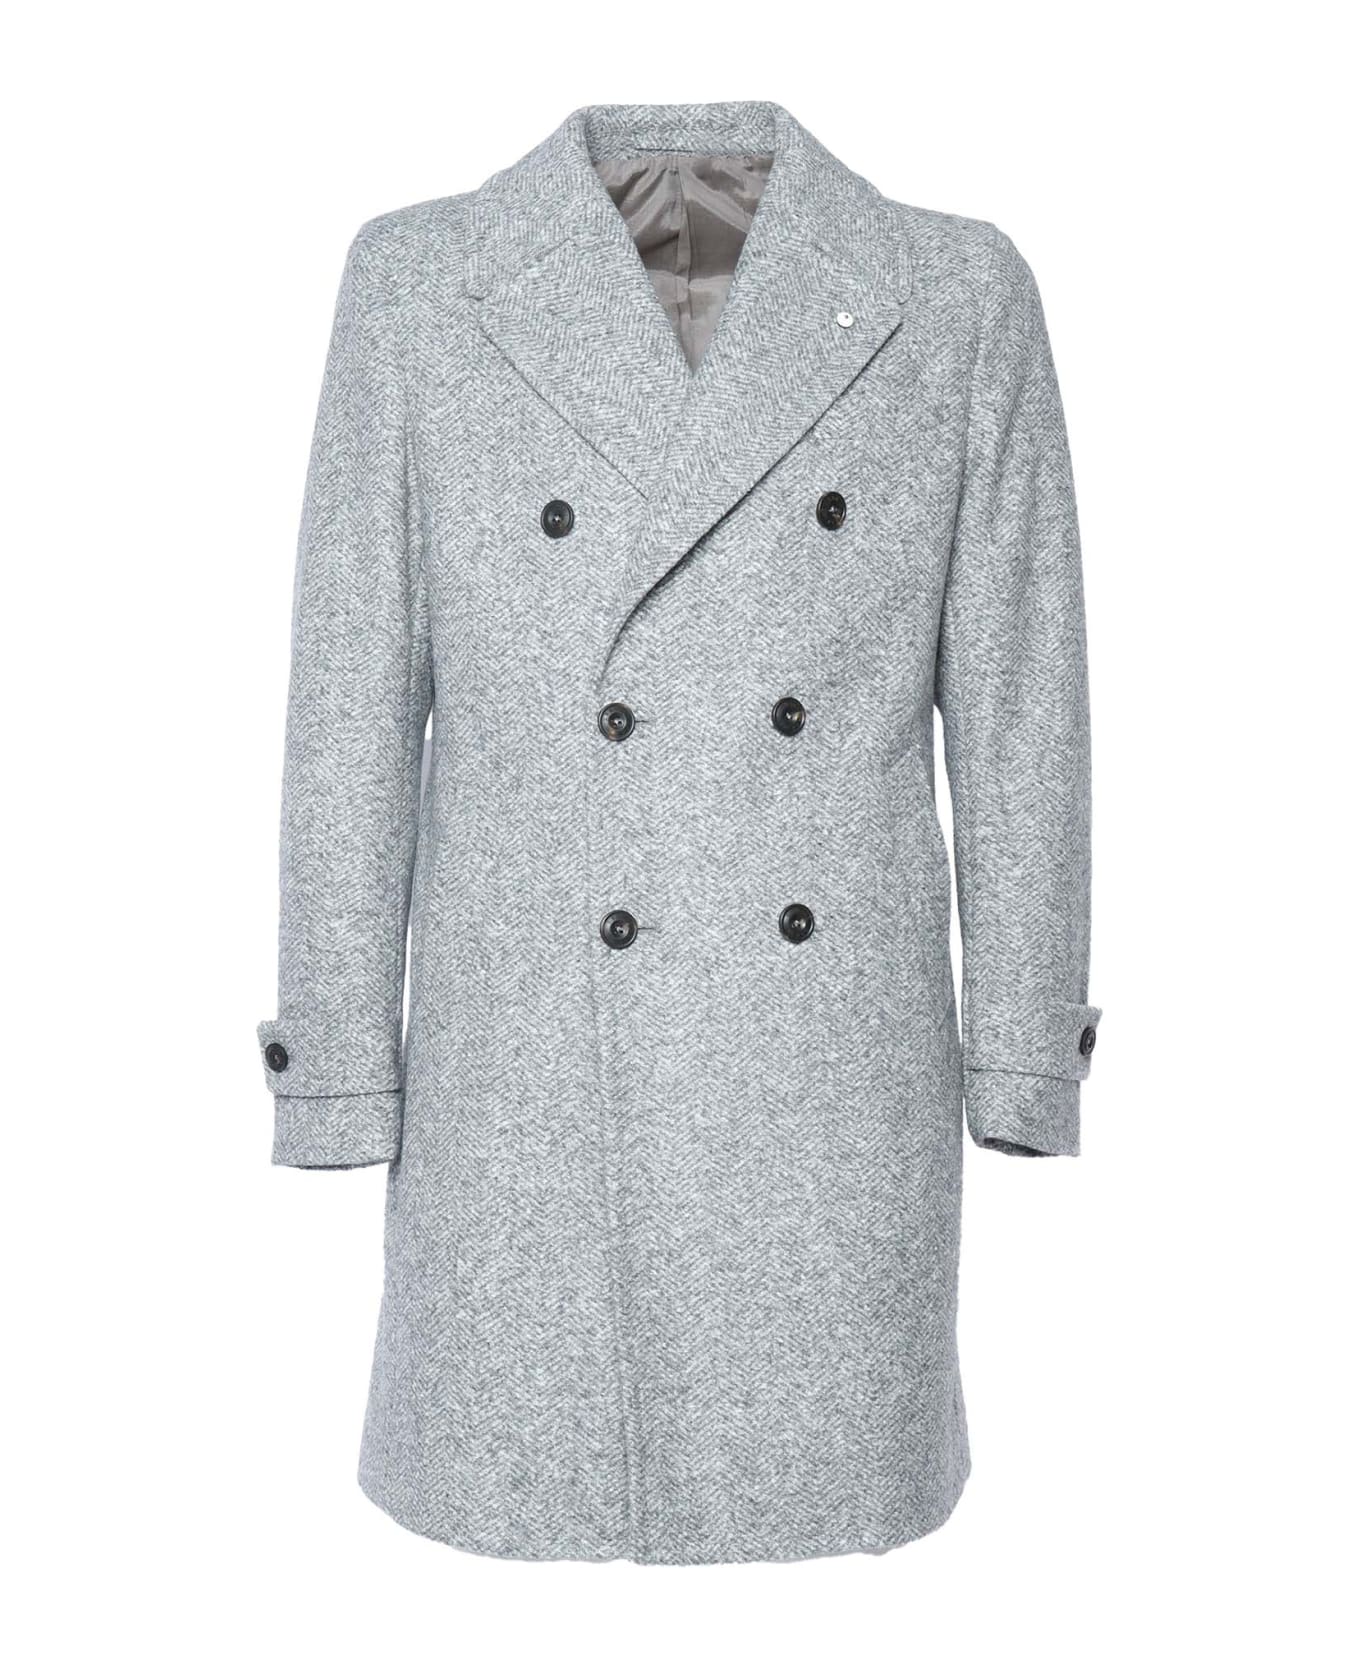 L.B.M. 1911 Double-breasted Coat - GREY